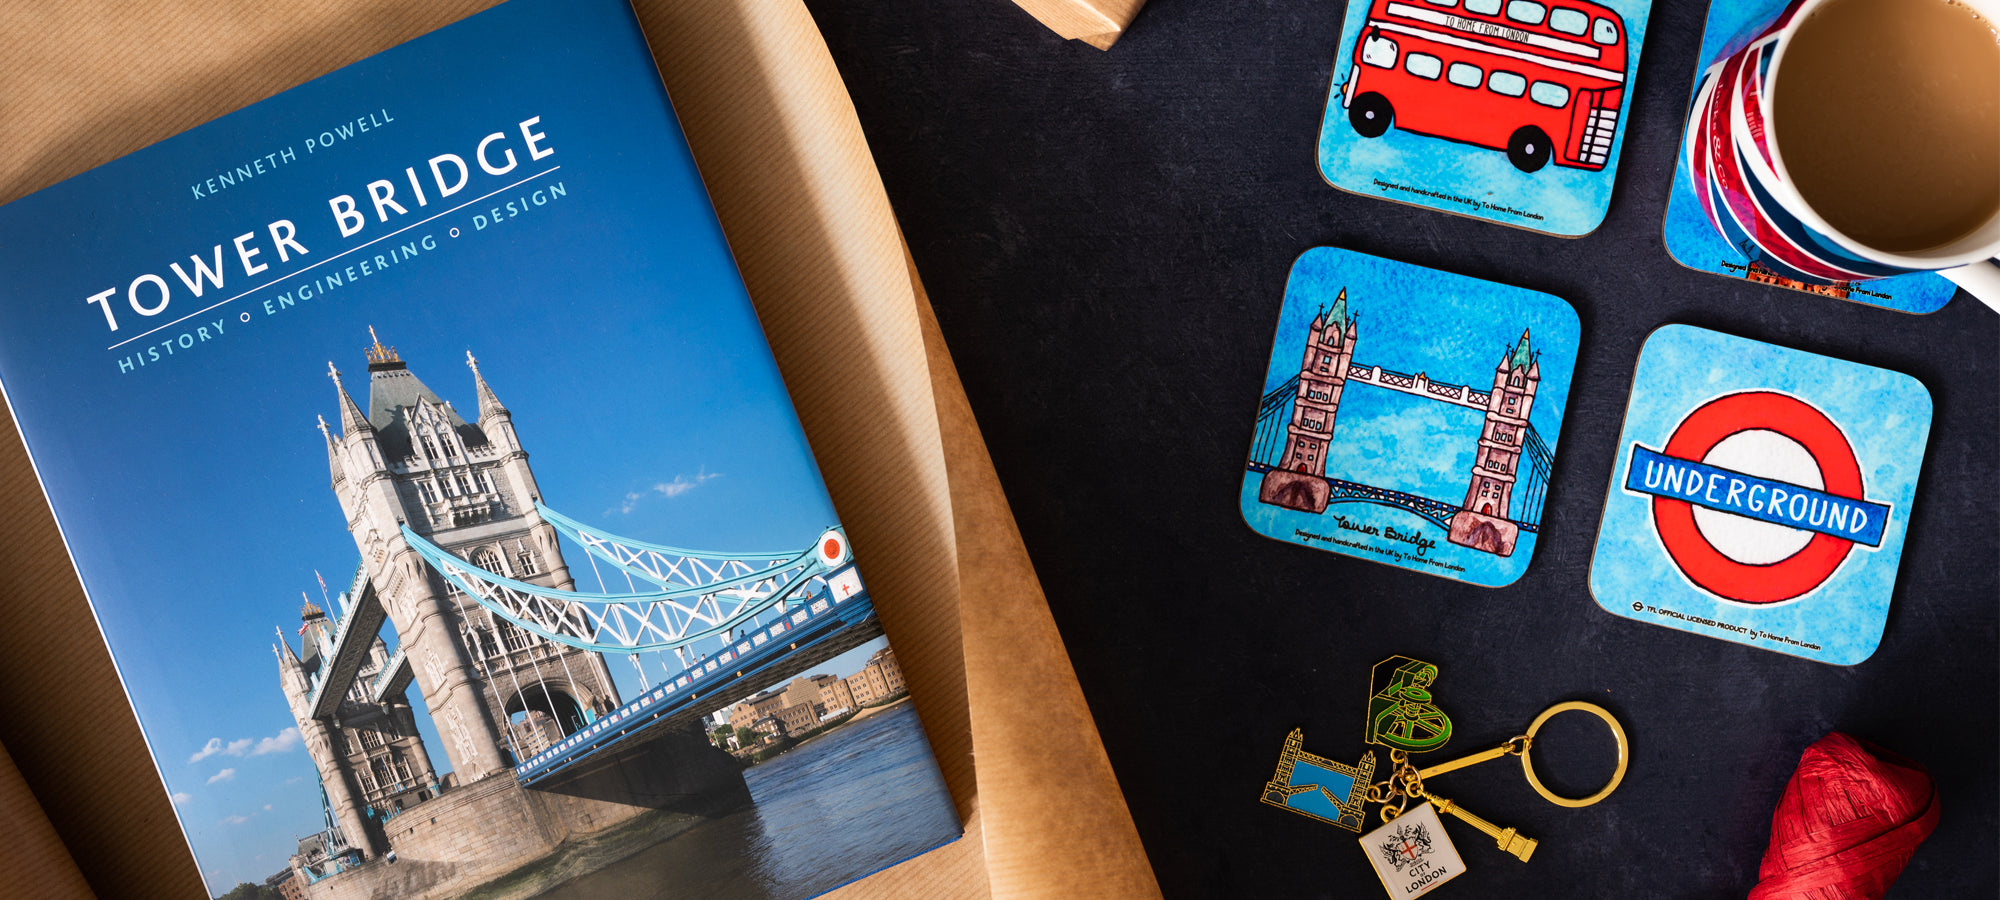 London gifts and souvenirs from Tower Bridge